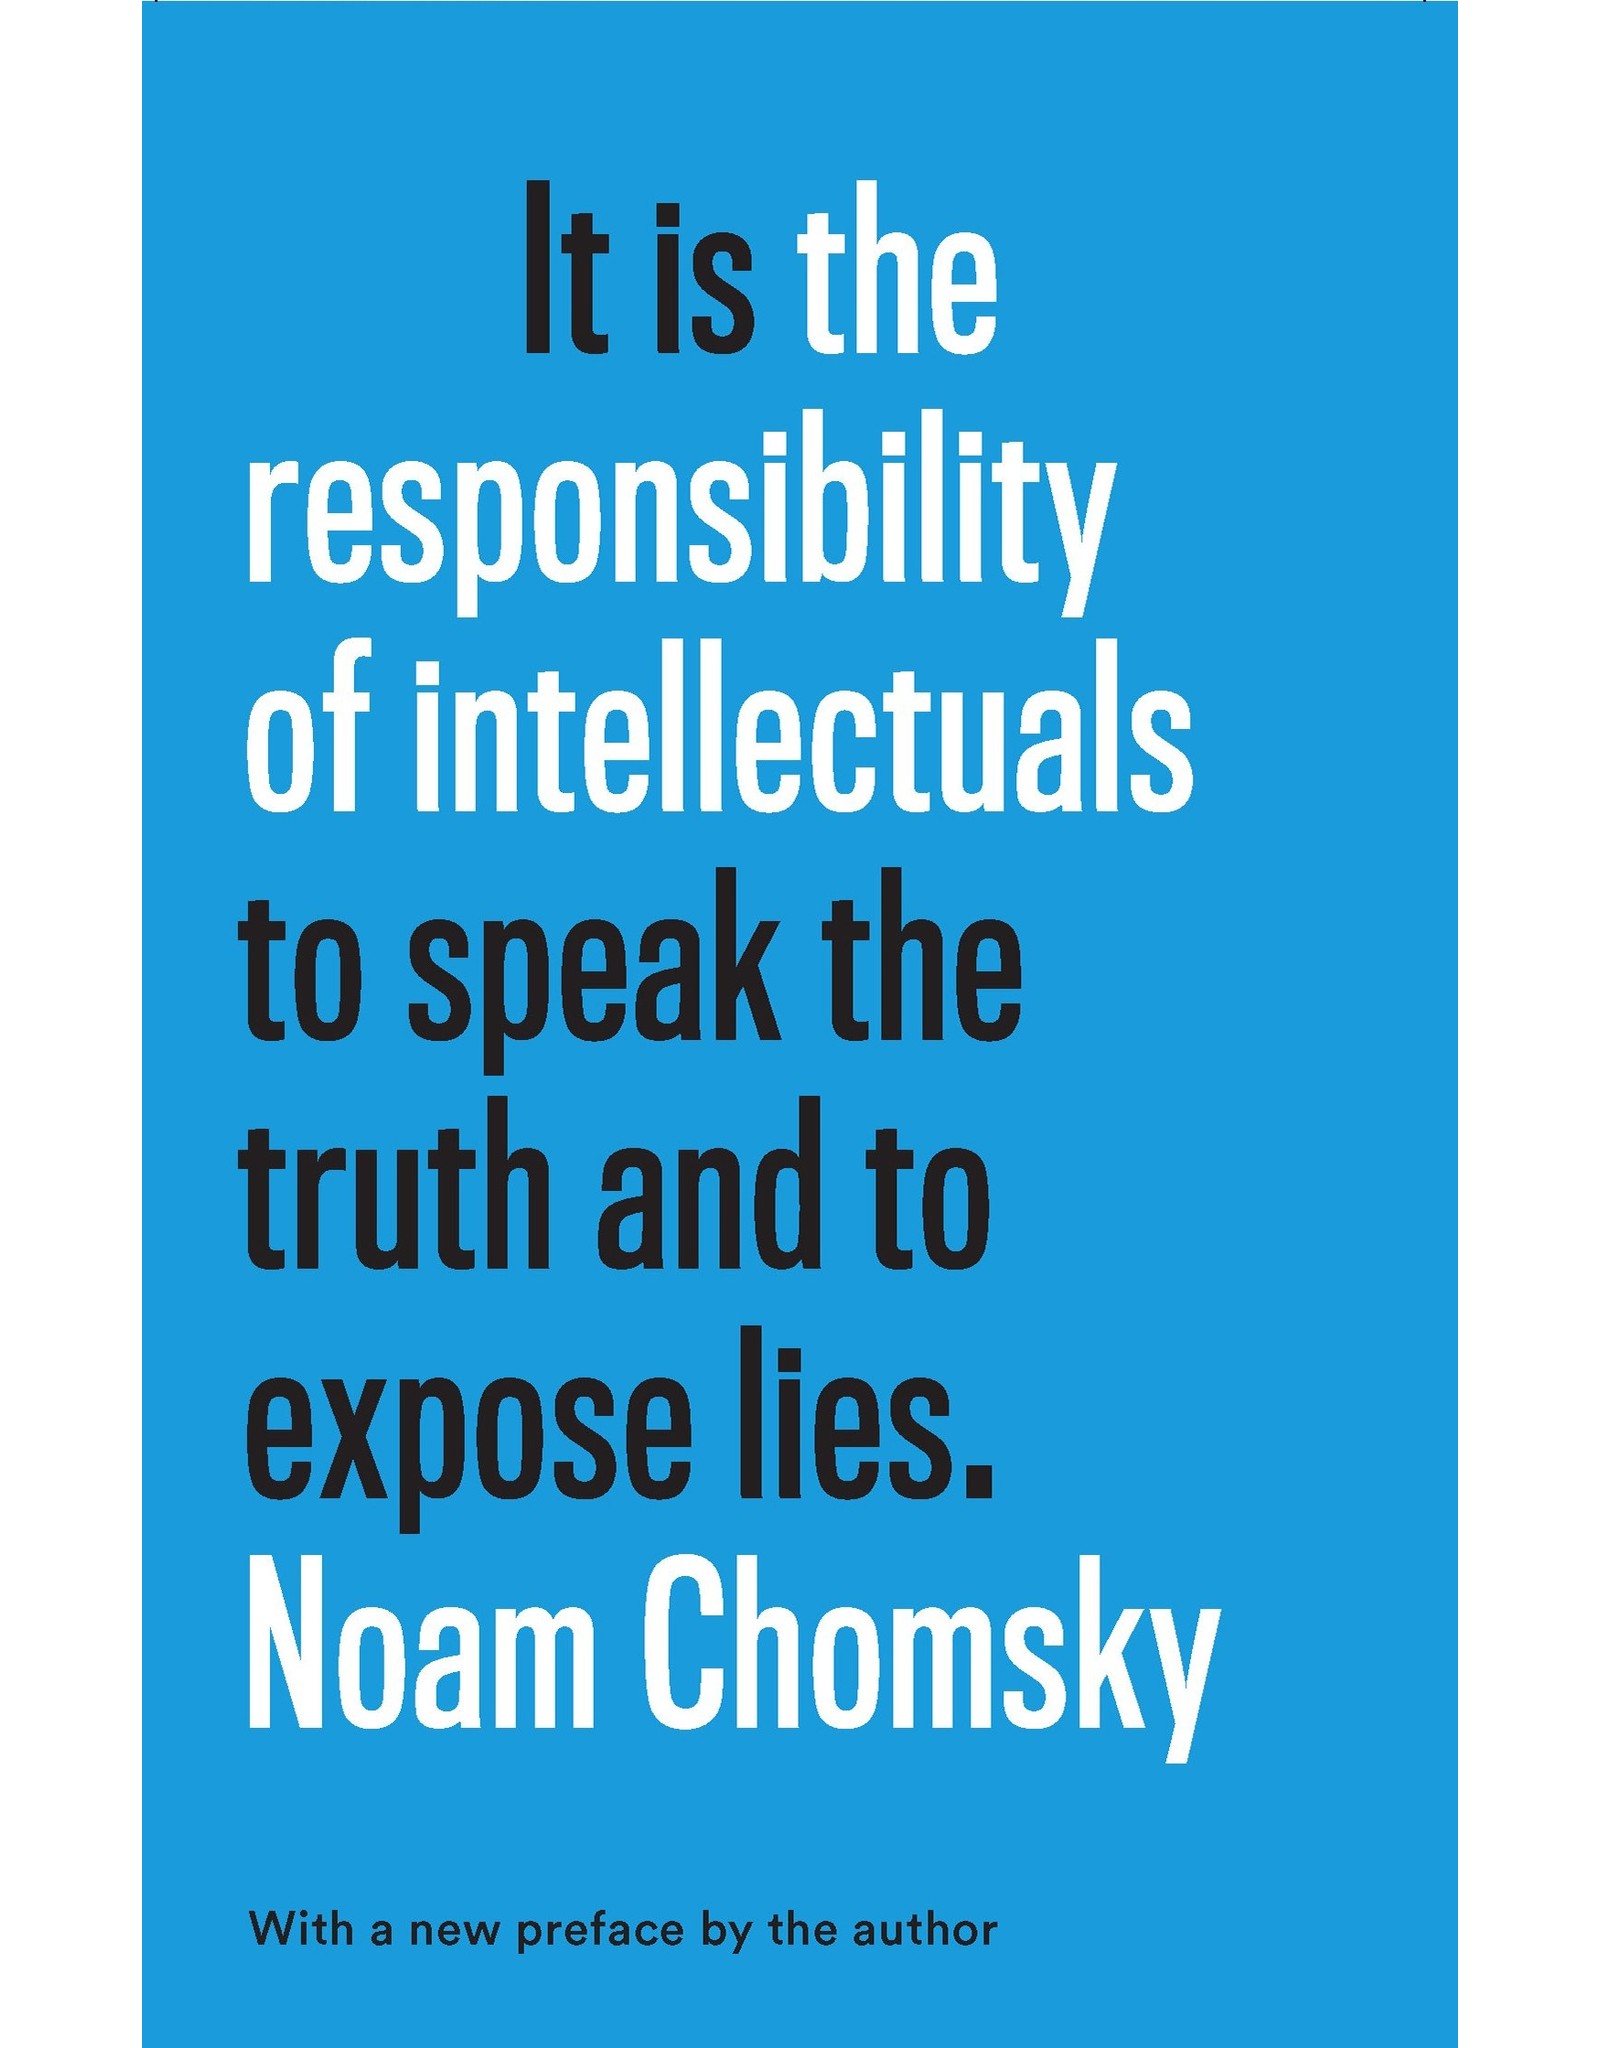 Literature It is the Responsibility of Intellectuals to Speak the Truth and to Expose Lies